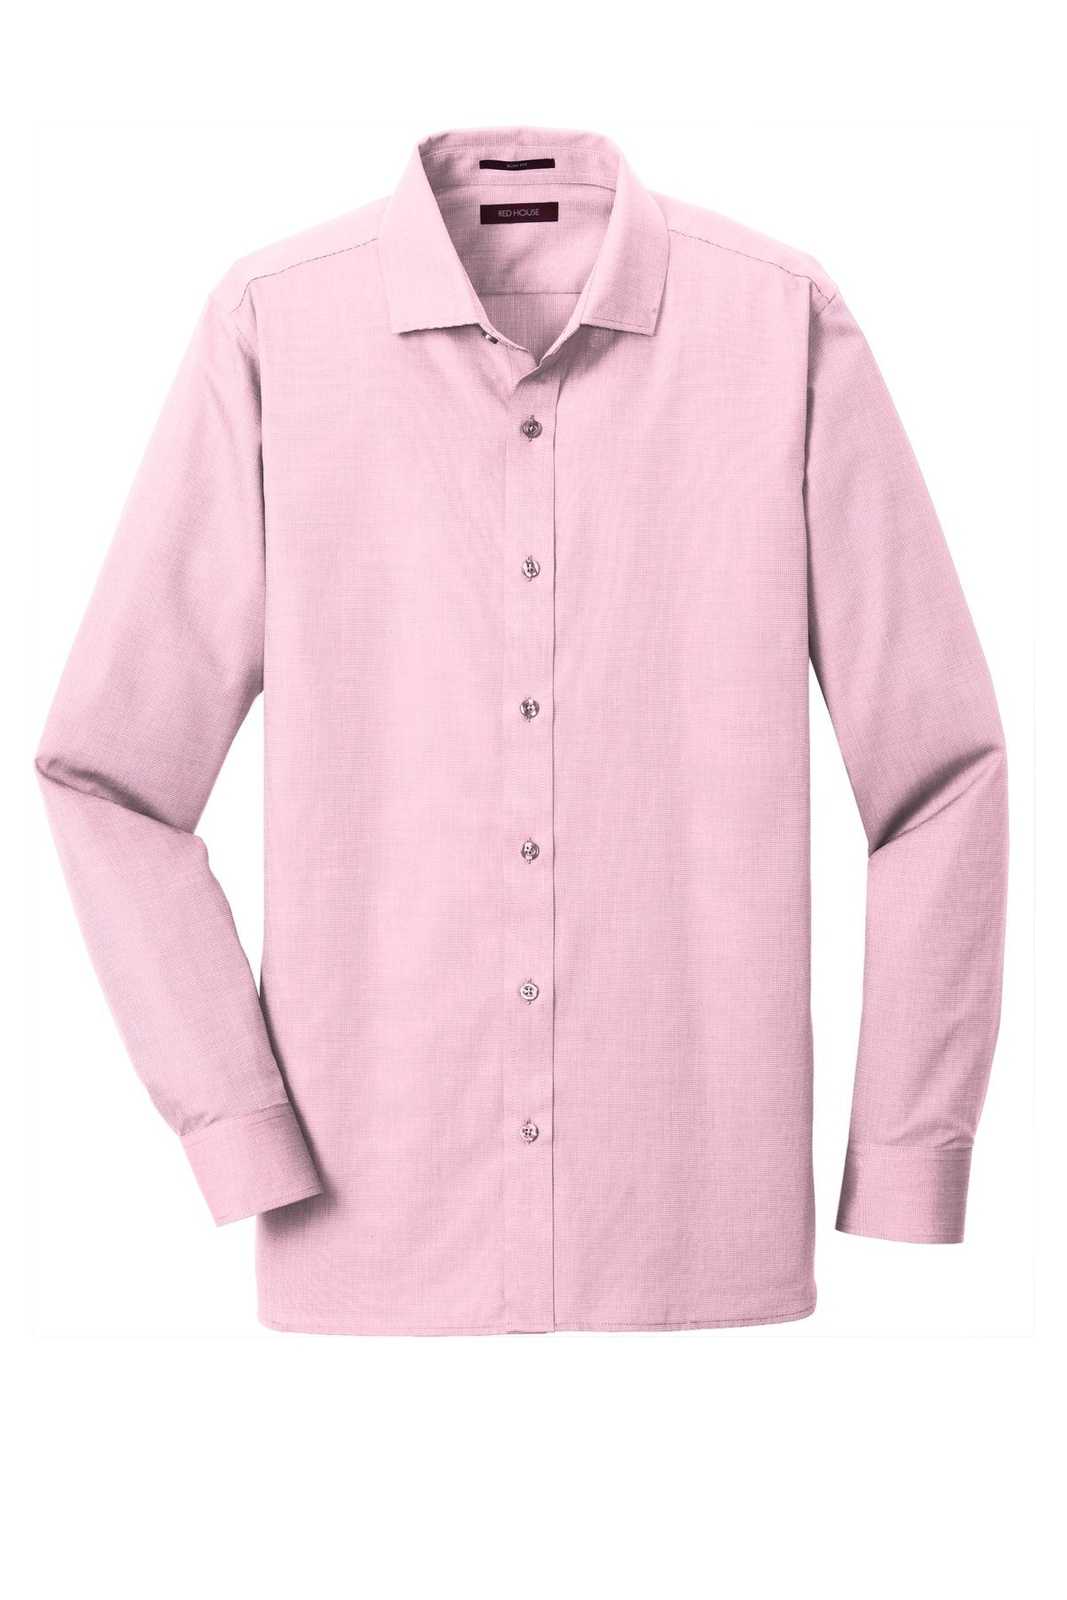 Red House RH390 Slim Fit Nailhead Non-Iron Shirt - Pink - HIT a Double - 5